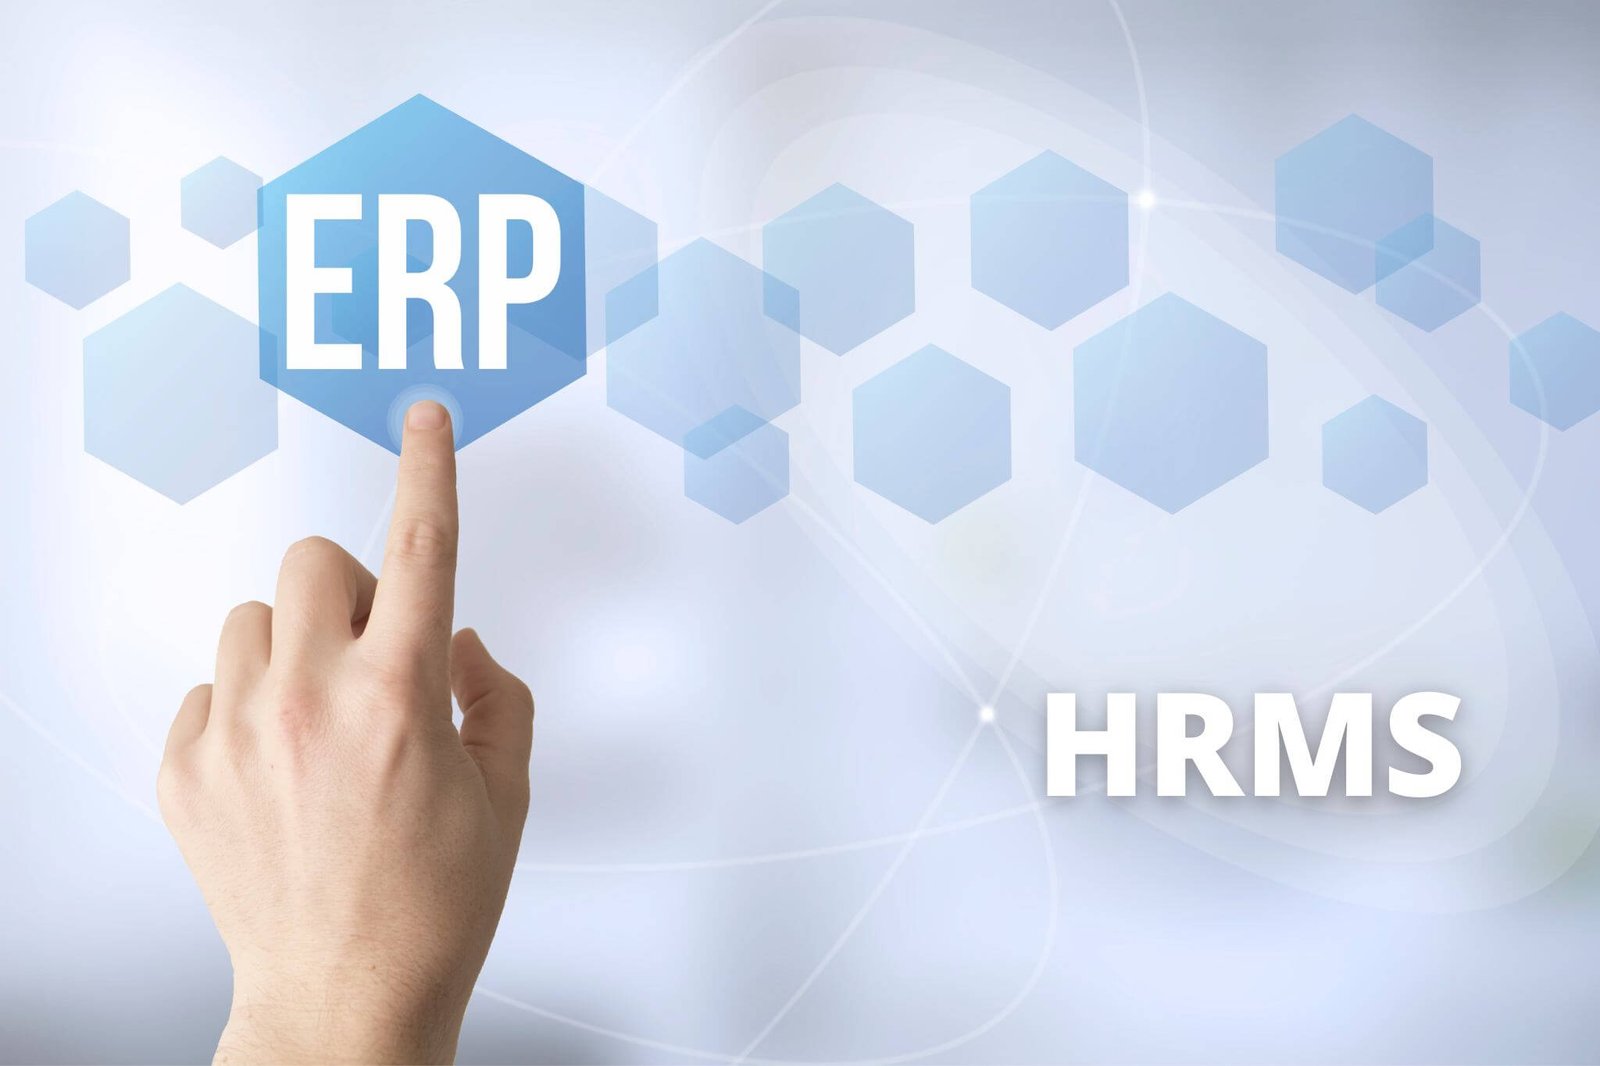 What Are the Benefits of Using ERP and HRMS?